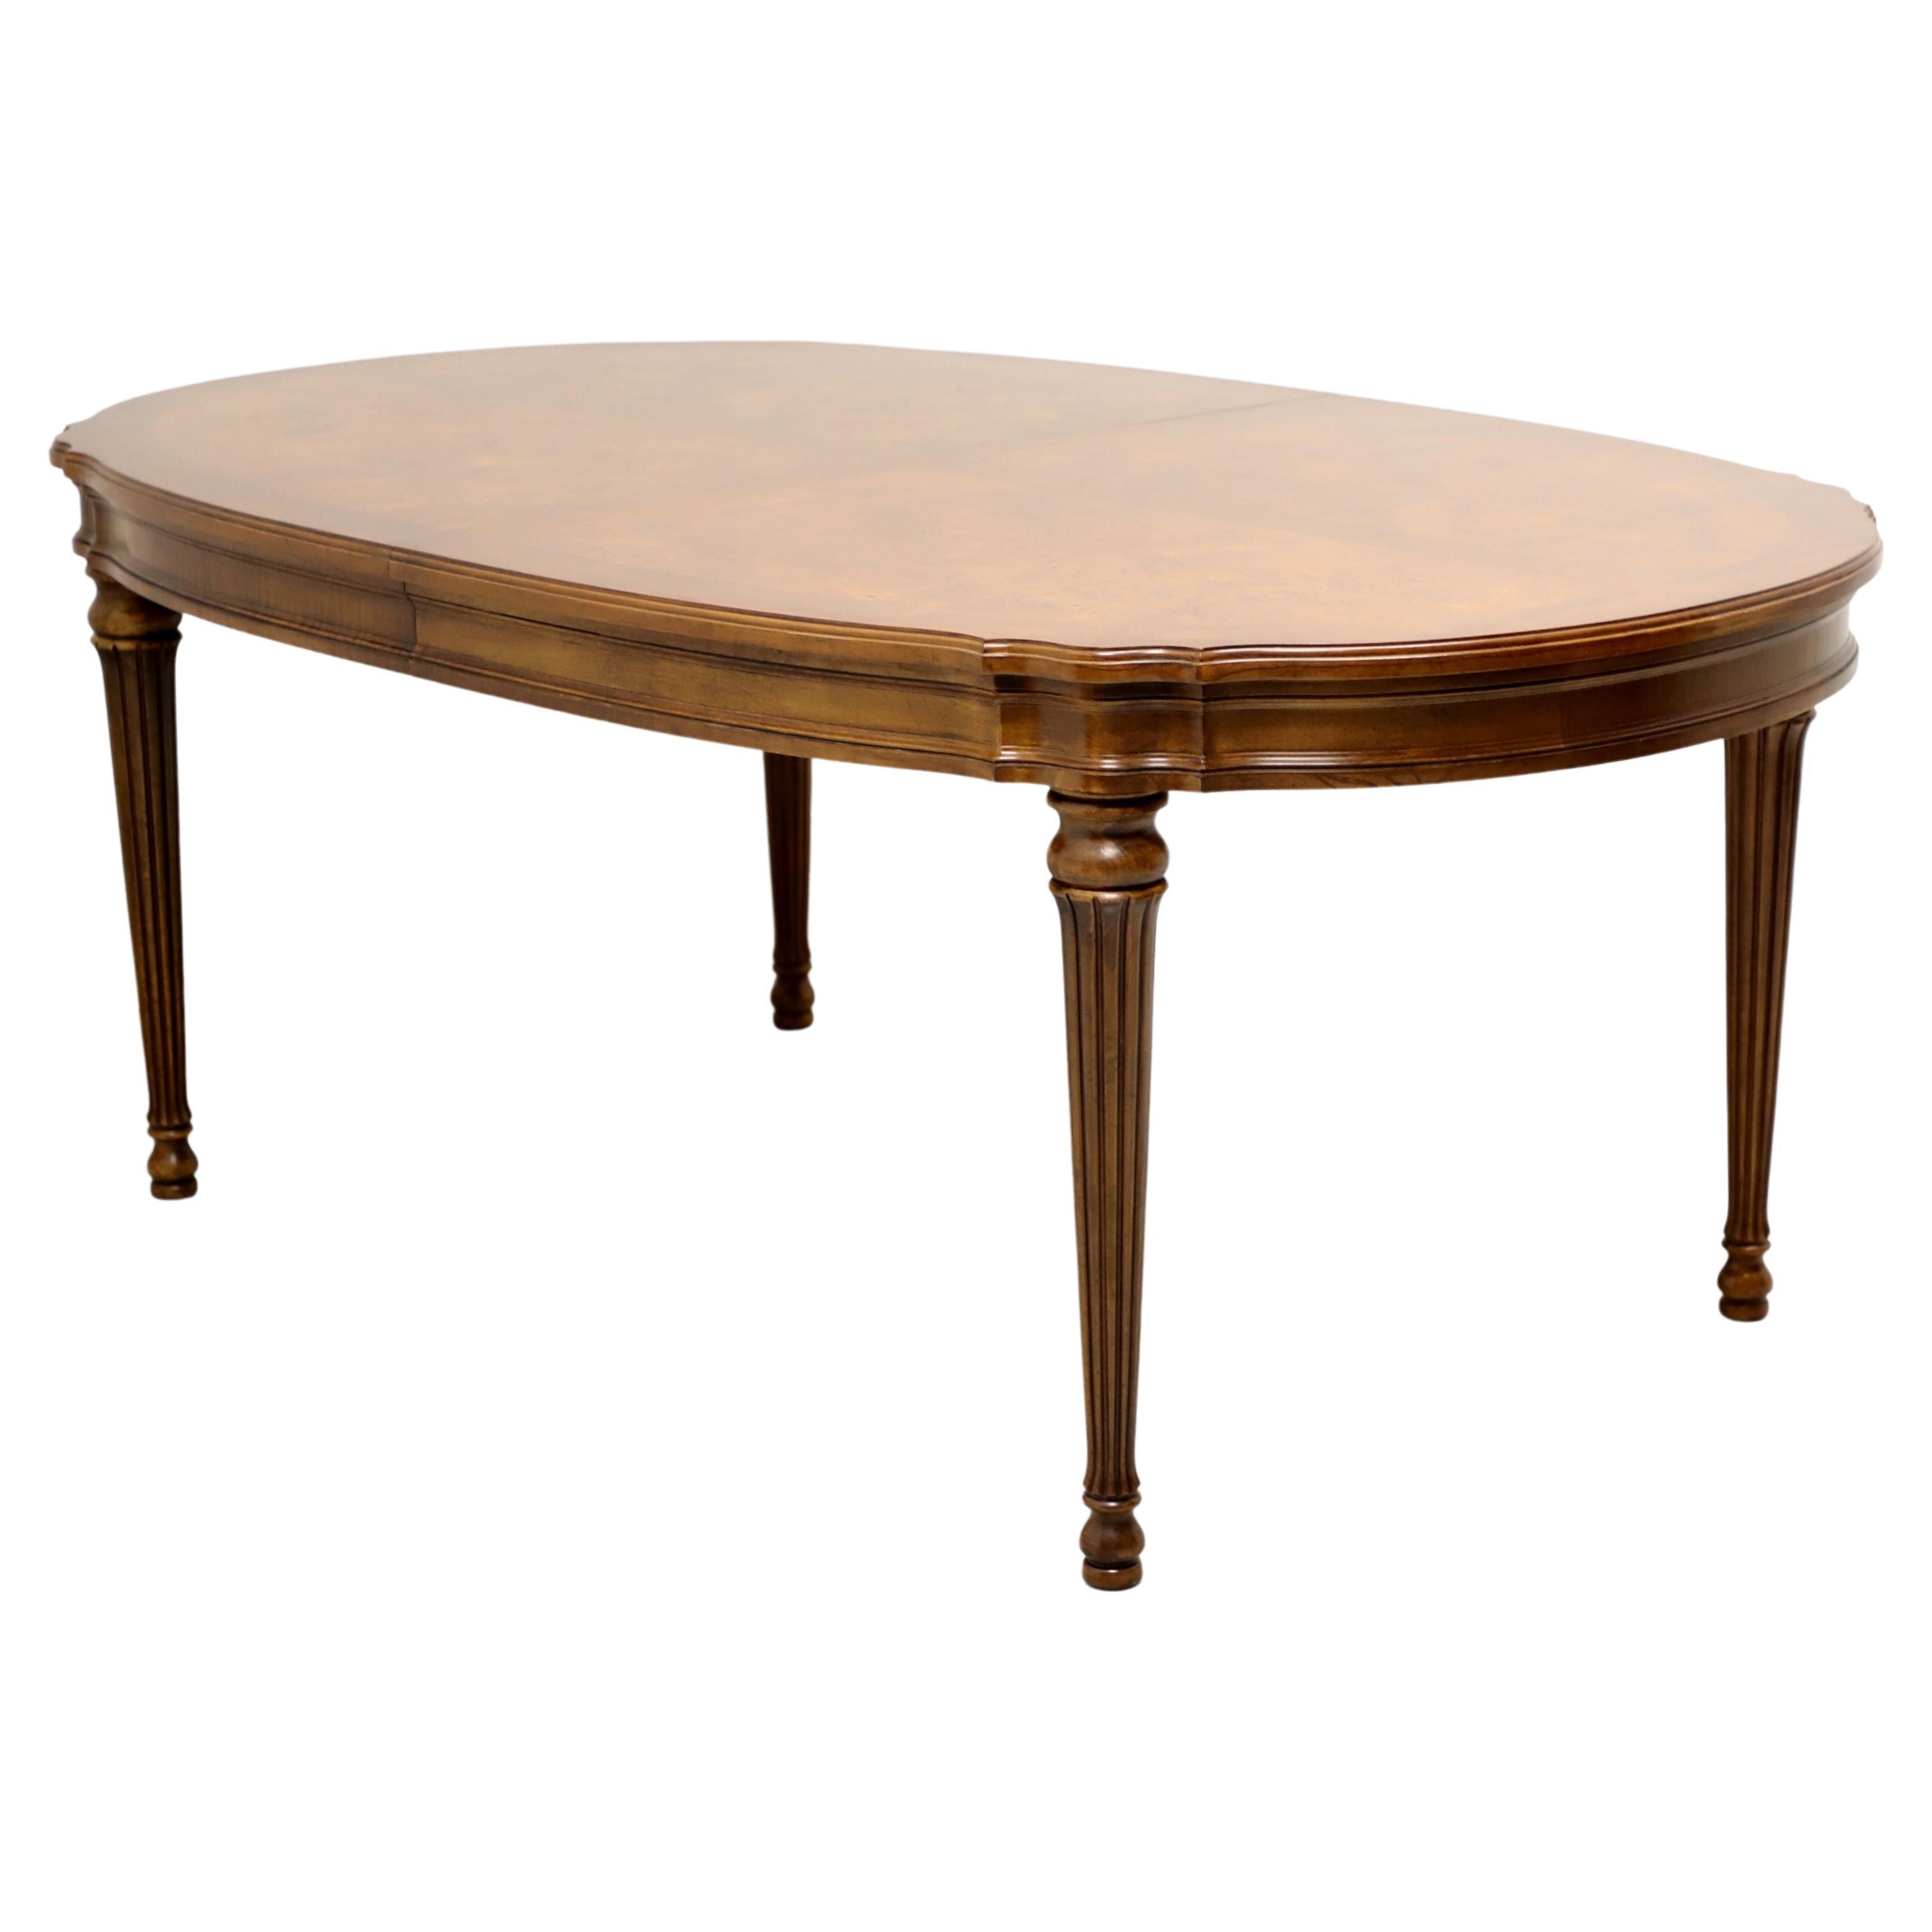 WHITE of Mebane Banded Inlaid Burl Elm French Provincial Oval Dining Table